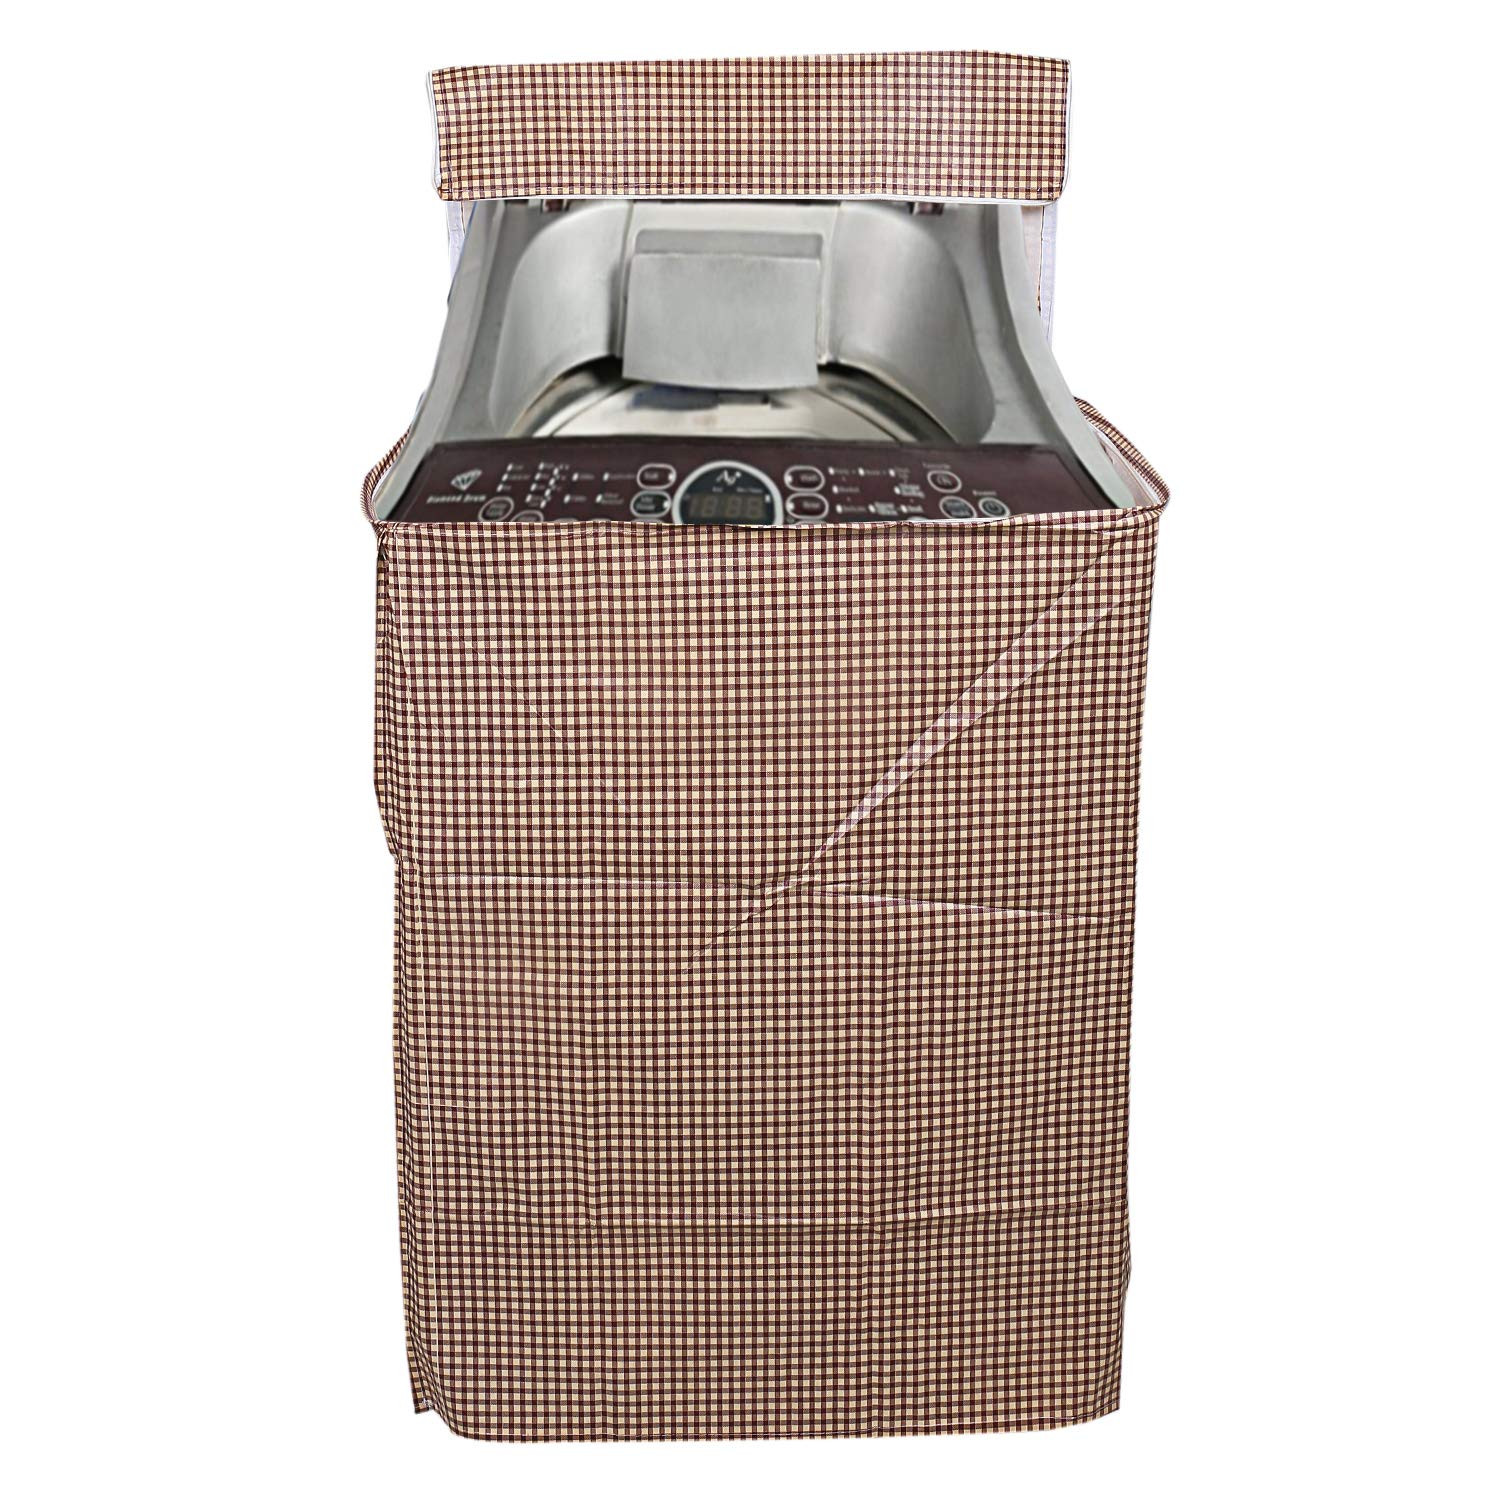 Kuber Industries PVC Top Load Fully Automatic Washing Machine Cover (Brown), CTKTC13566